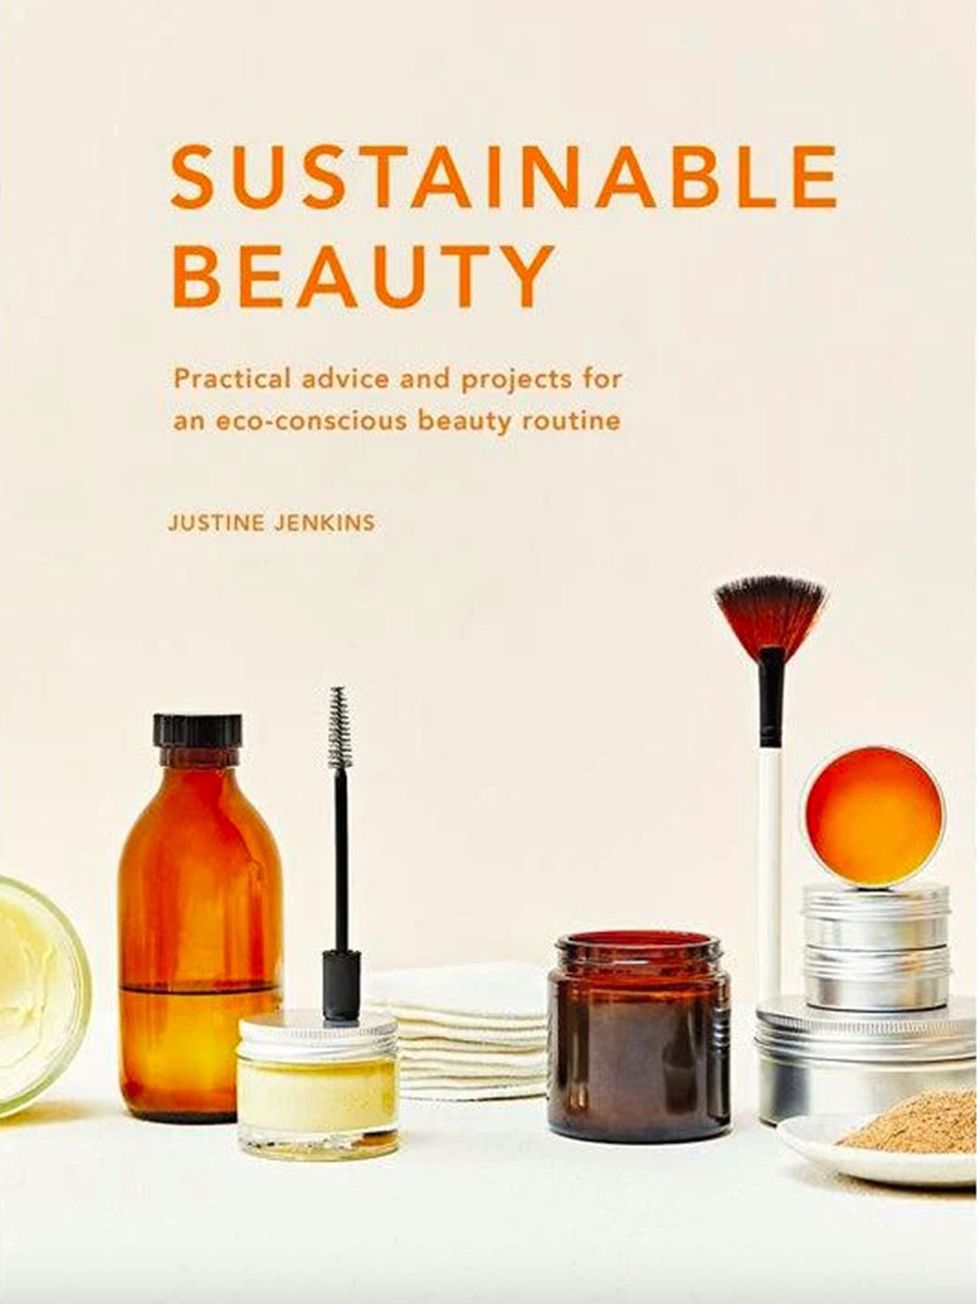 Sustainable Beauty: Practical Advice and Projects for an Eco-Conscious Beauty Routine